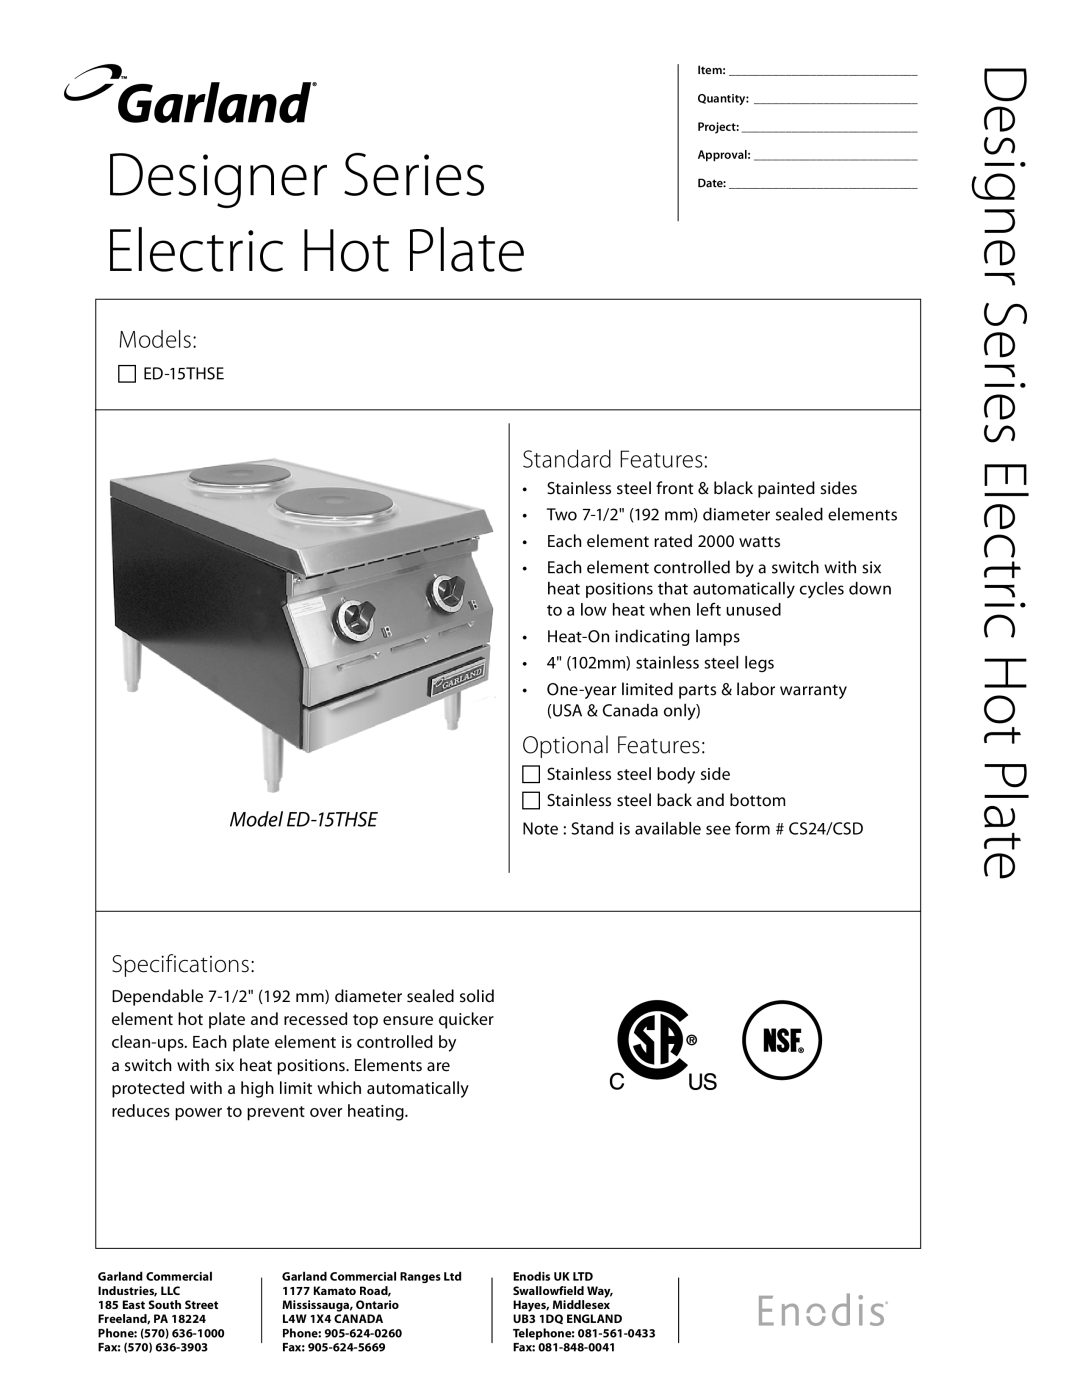 Garland ED-15THSE specifications Series Electric Hot Plate, Designer Series, Models, Standard Features, Specifications 